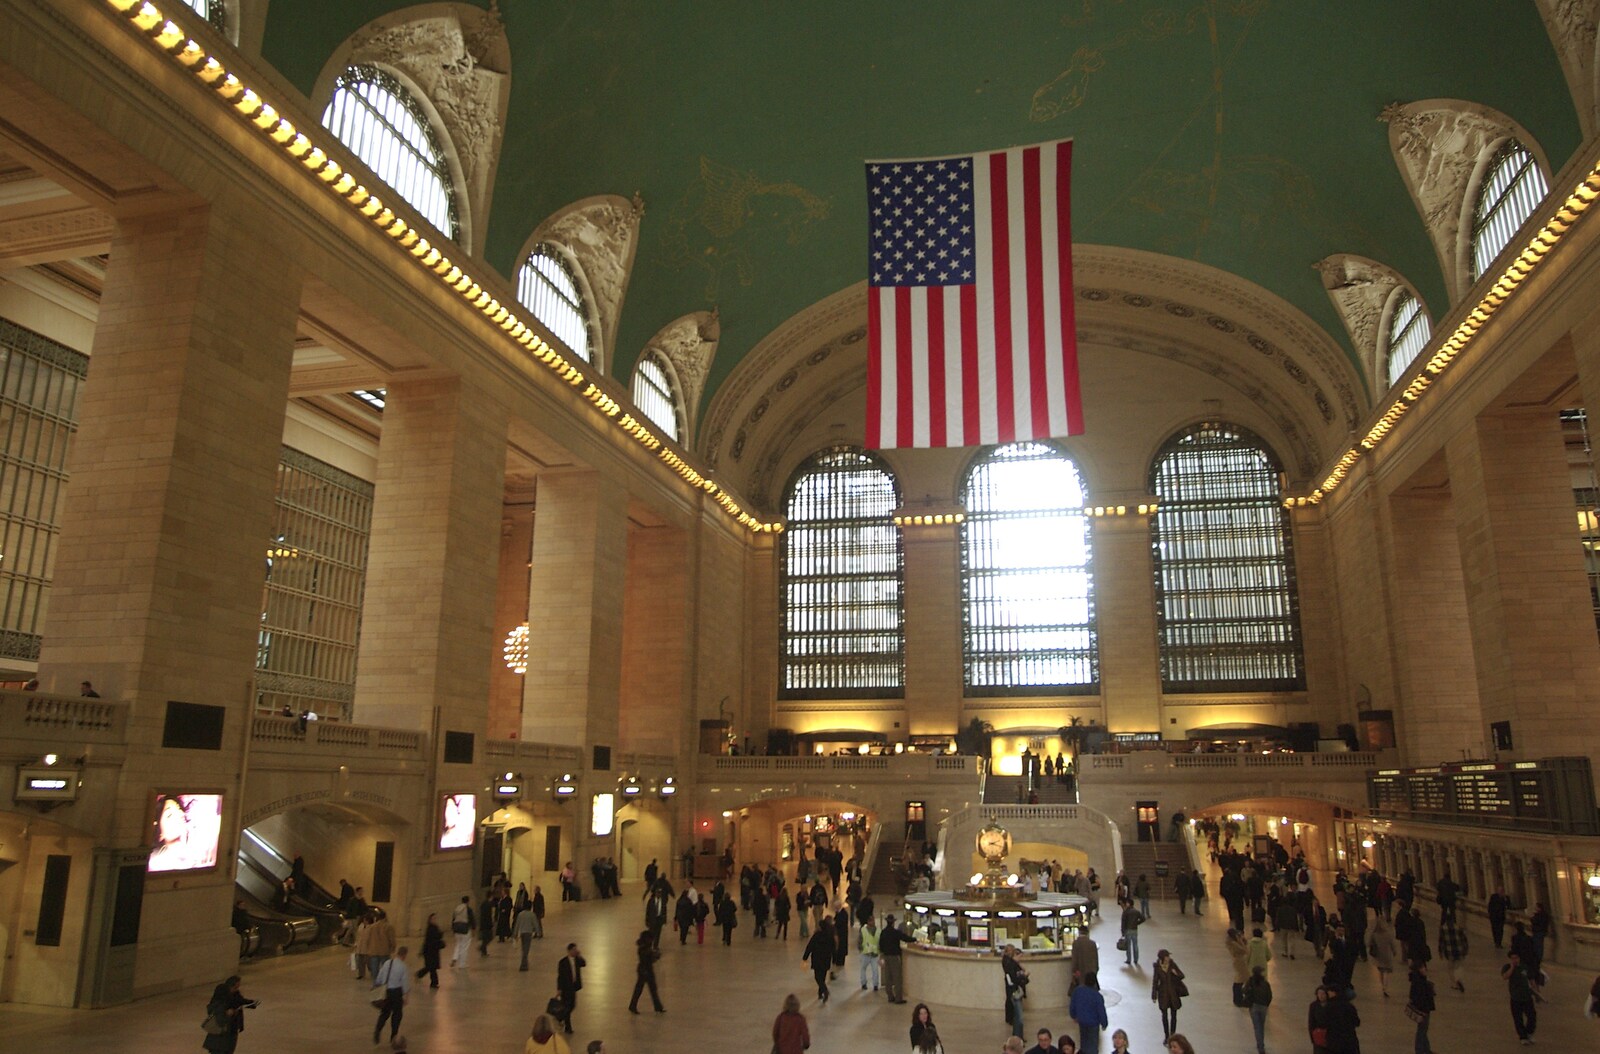 Persian Day Parade, Upper East Side and Midtown, New York, US - 25th March 2007: Grand Central's main concourse